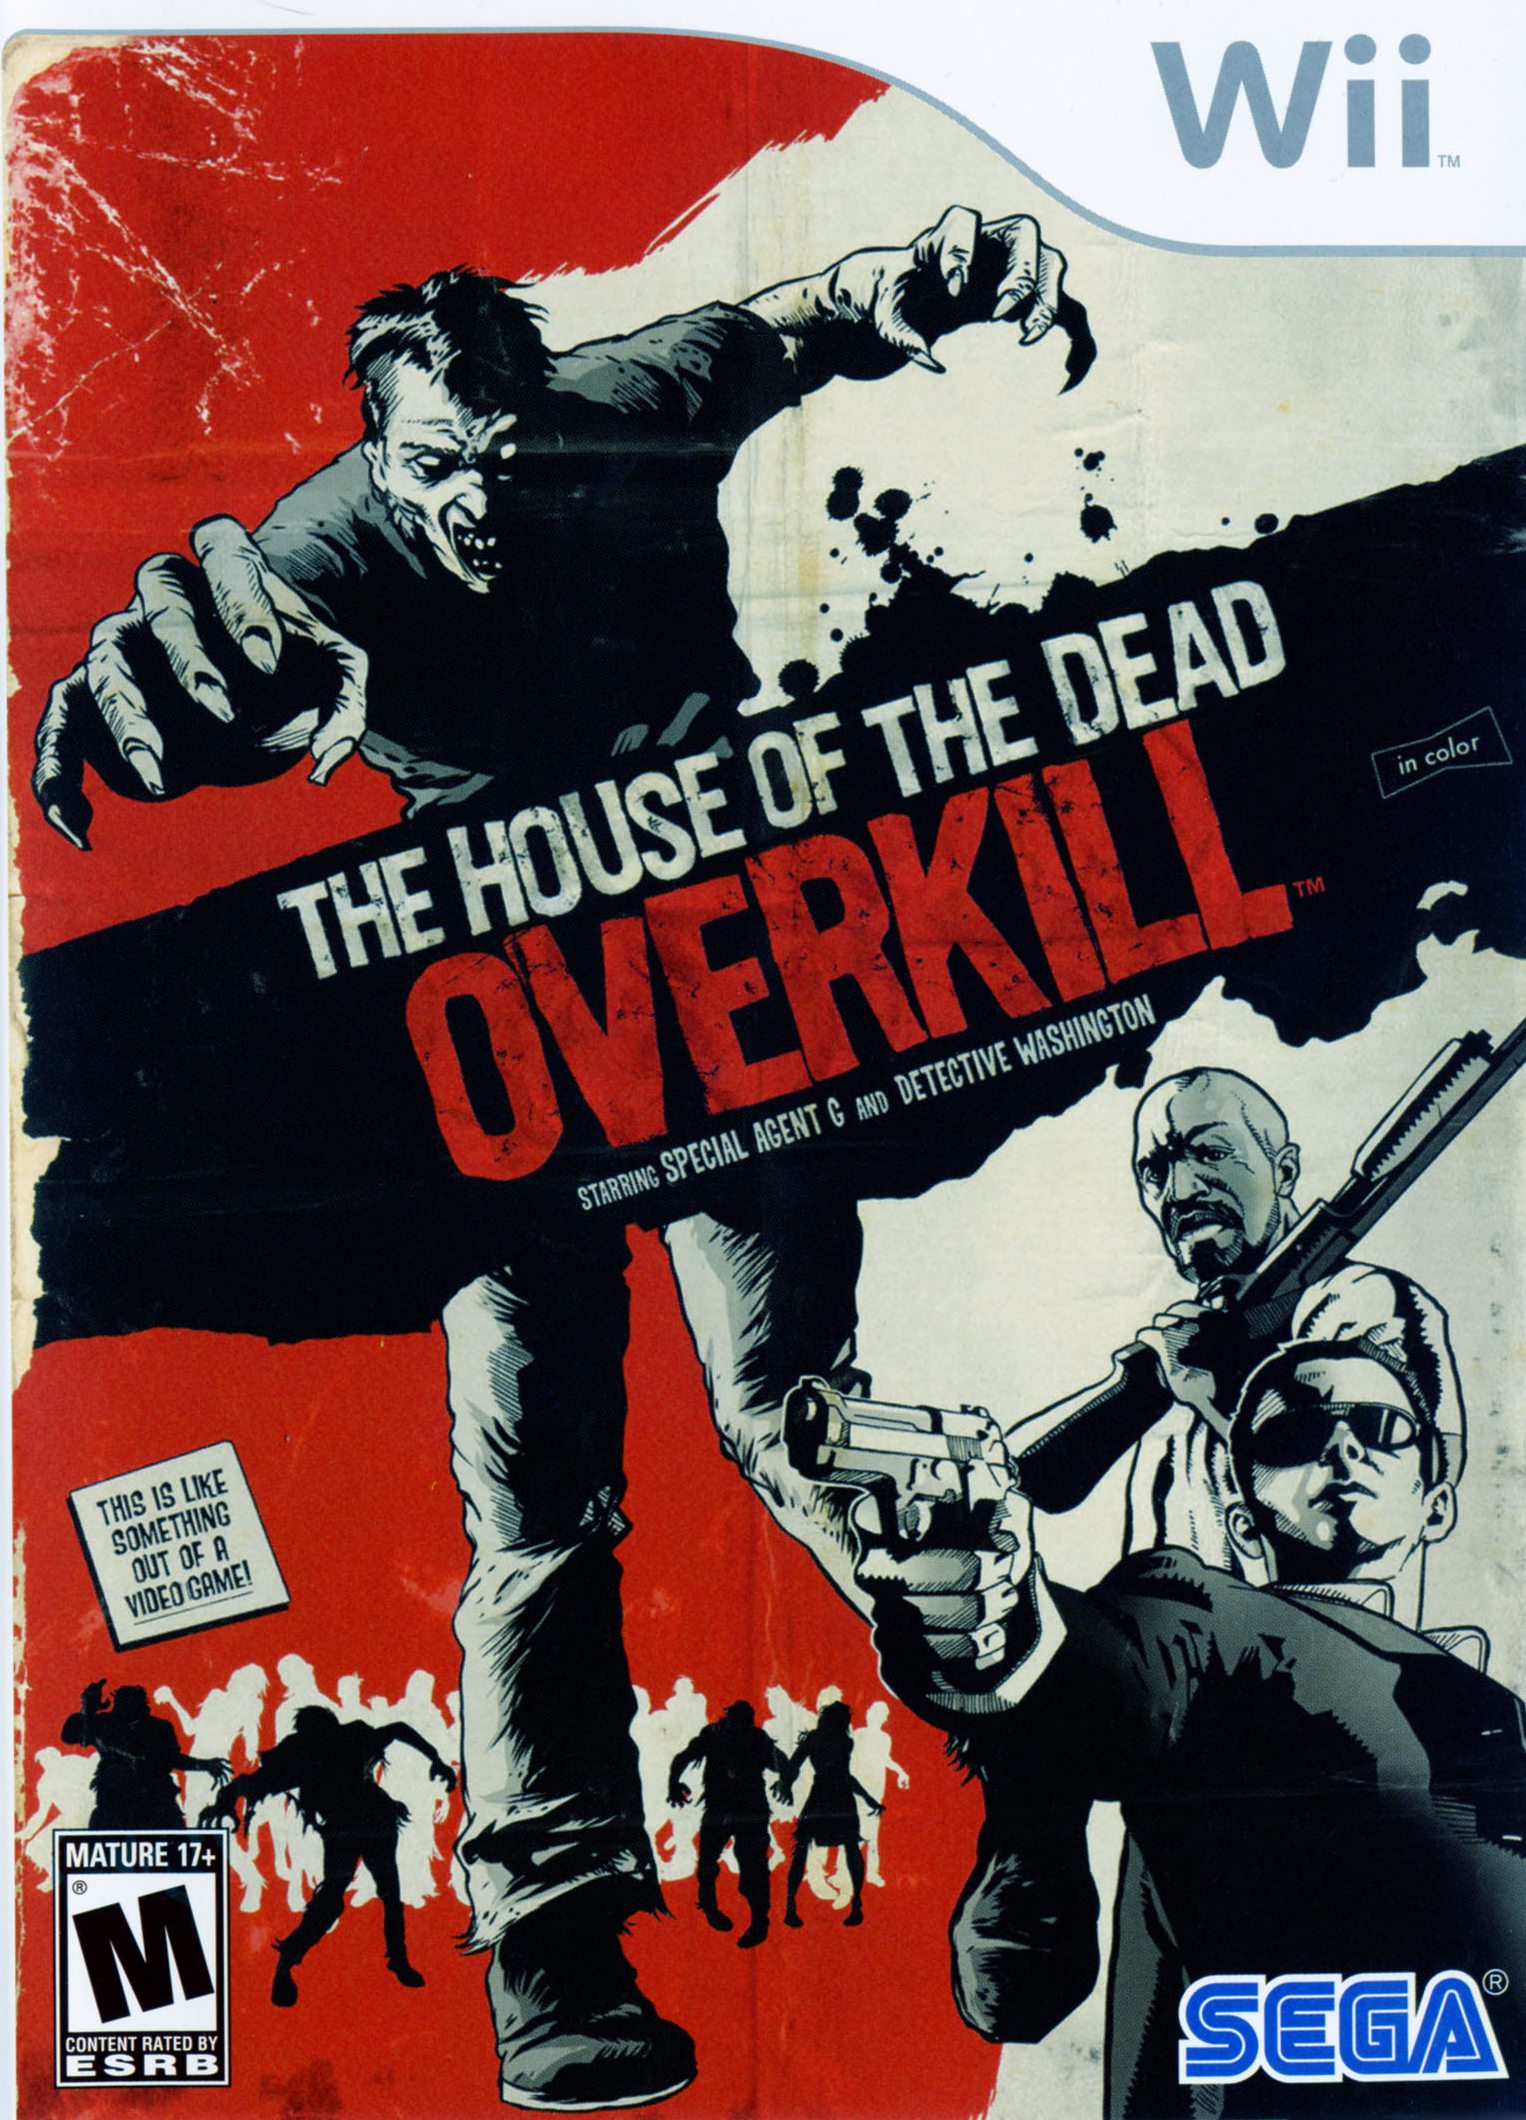 The House Of The Dead Overkill/Wii